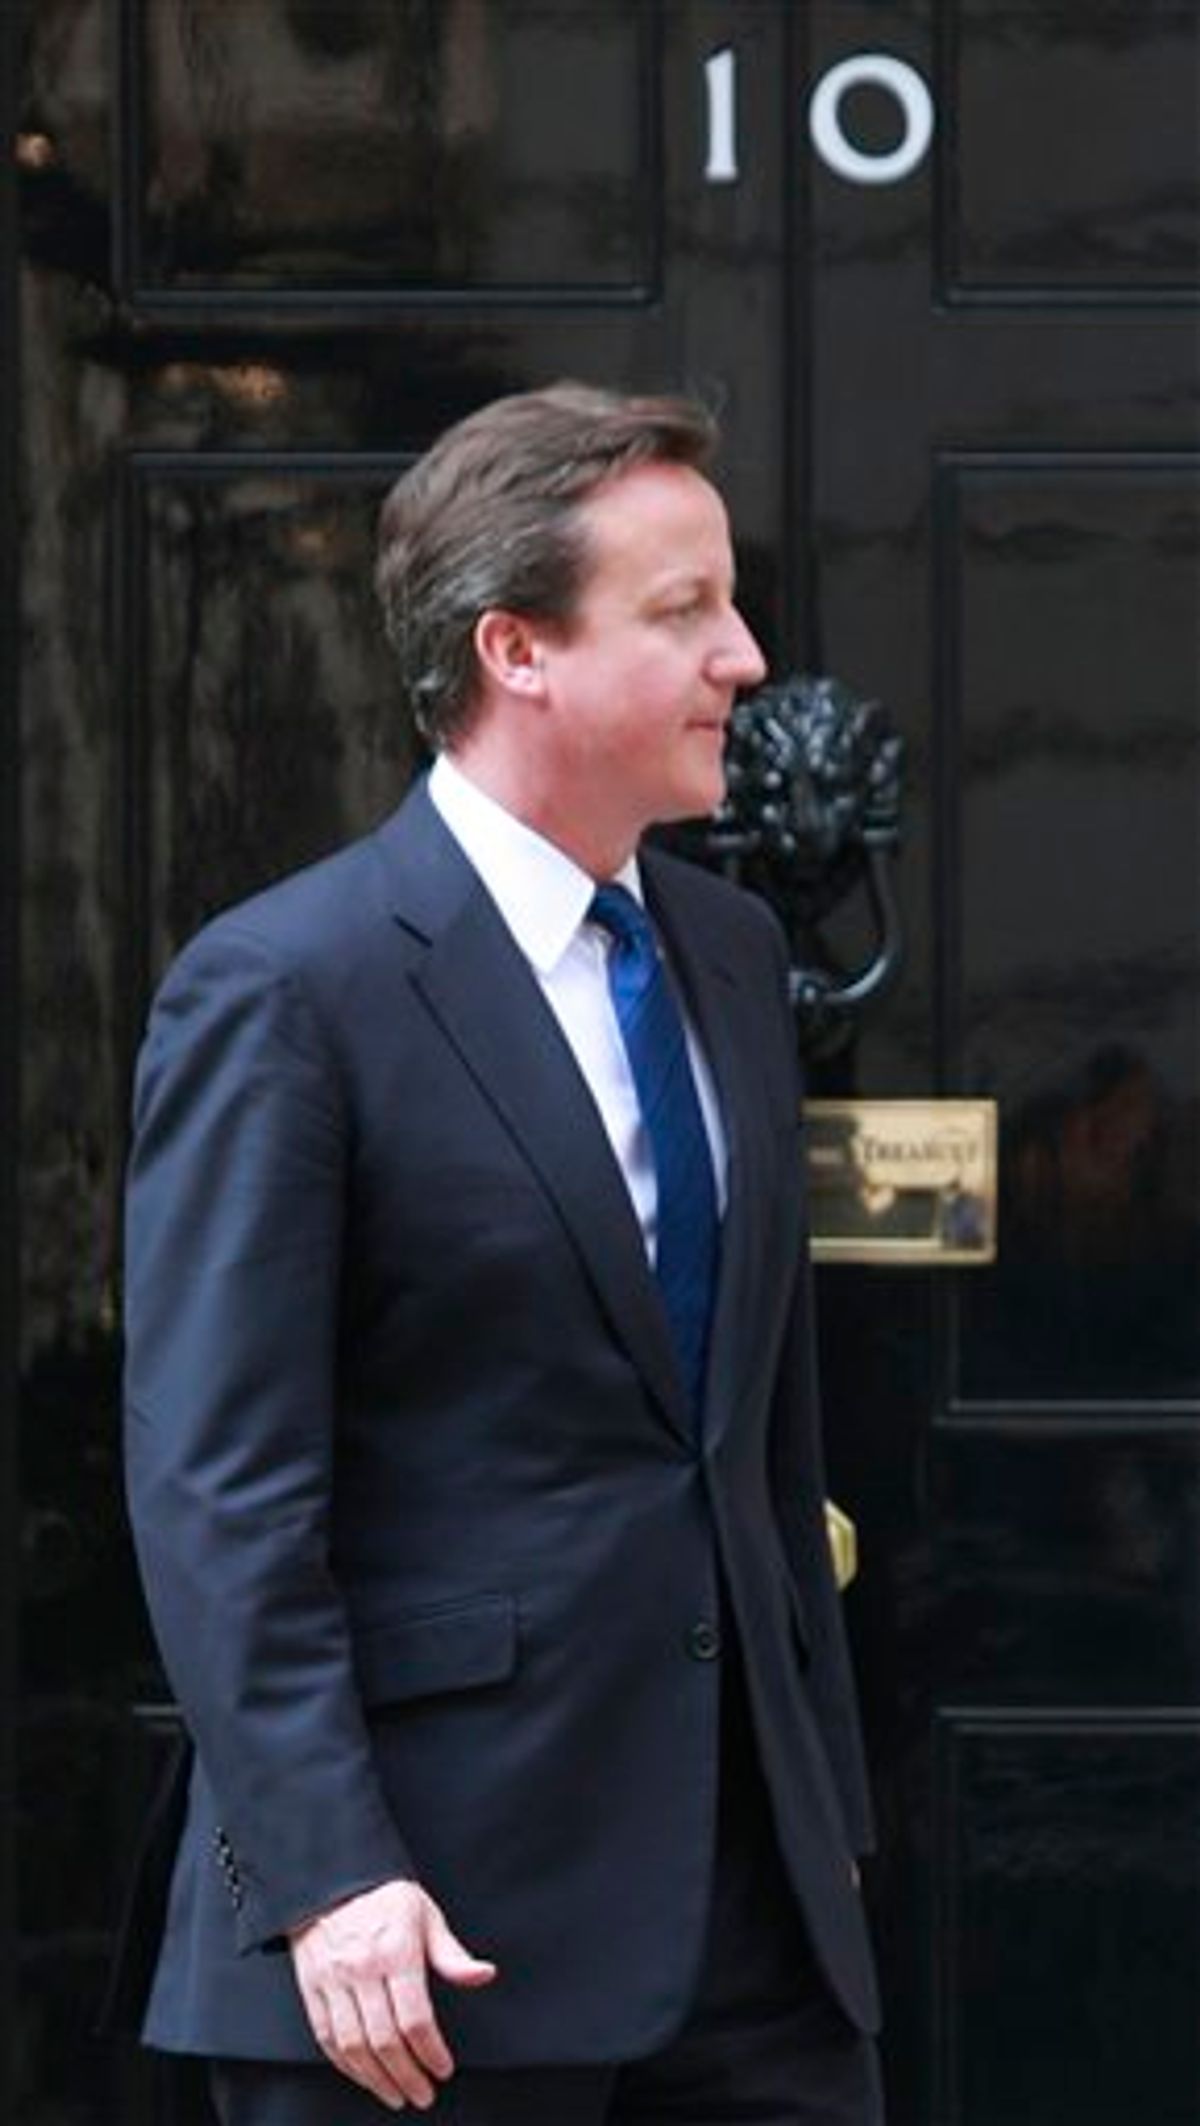 Britain's Prime Minister David Cameron, exits his official residence at 10 Downing Street in London, prior to a meeting, Monday, April 18, 2011. Cameron won't be wearing a formal morning suit with long tails to the royal wedding. Officials said Monday April 18, 2011, that the prime minister will wear a business suit to the April 29 wedding of Prince William and Kate Middleton. The invitation gives men a choice between suits, military uniforms, or traditional formal wear, which includes a long coat with tails. Religious leaders are allowed to wear their clerical outfits.(AP Photo/Lefteris Pitarakis)    (AP)